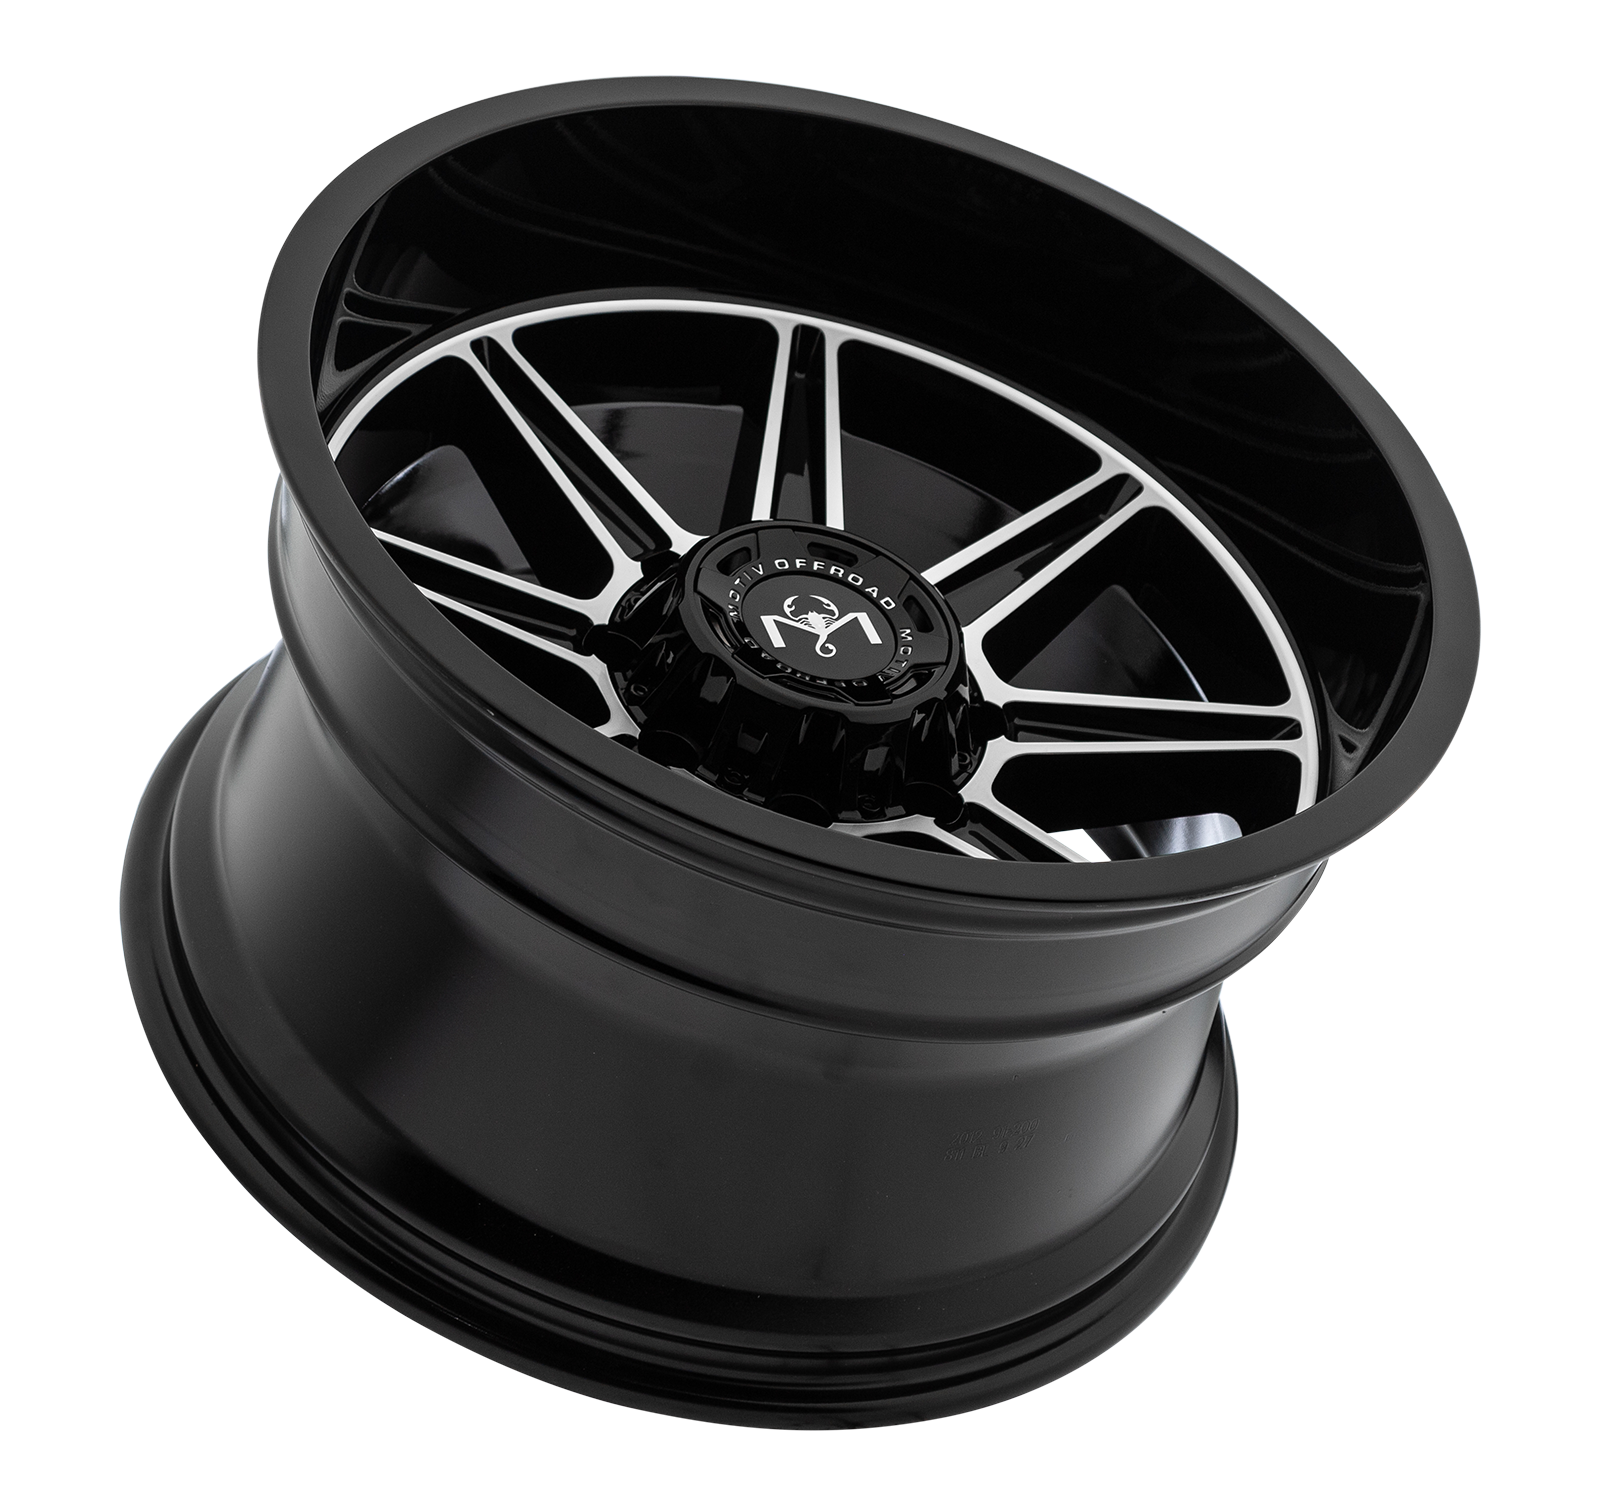 Motiv Off Road BALAST 20X9 +18 8X180 Gloss Black With Machined Face Accents